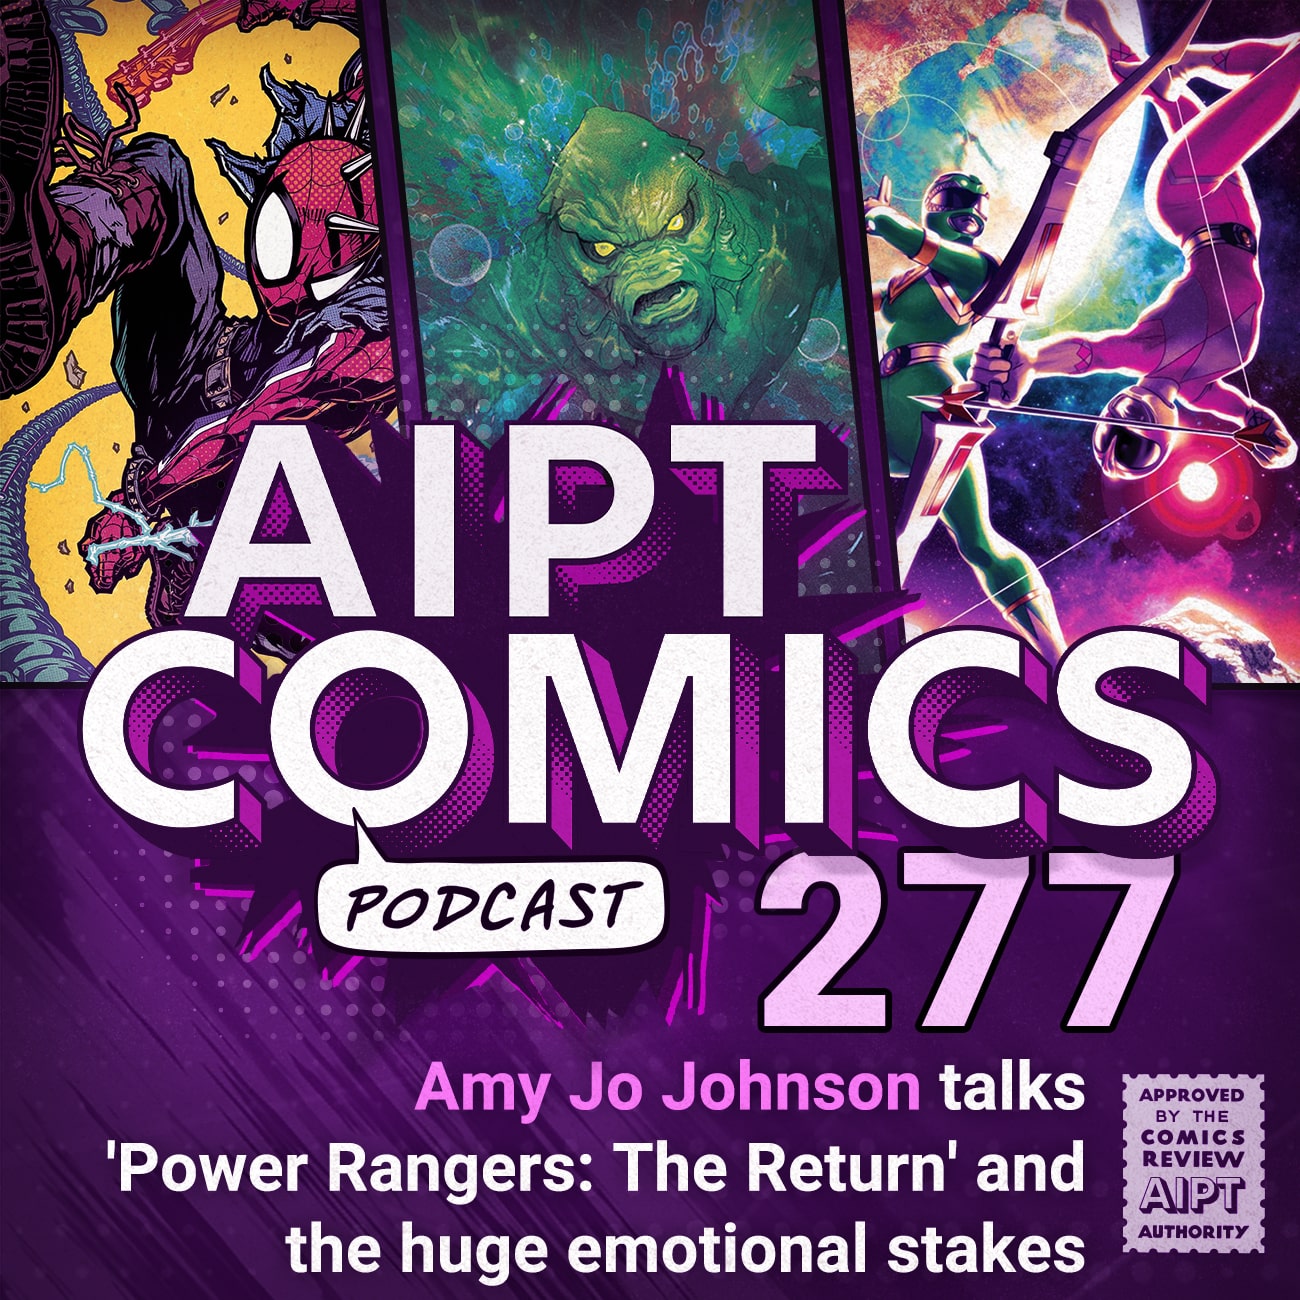 AIPT Comics Podcast Episode 277: Amy Jo Johnson talks 'Power Rangers: The Return' and the huge emotional stakes